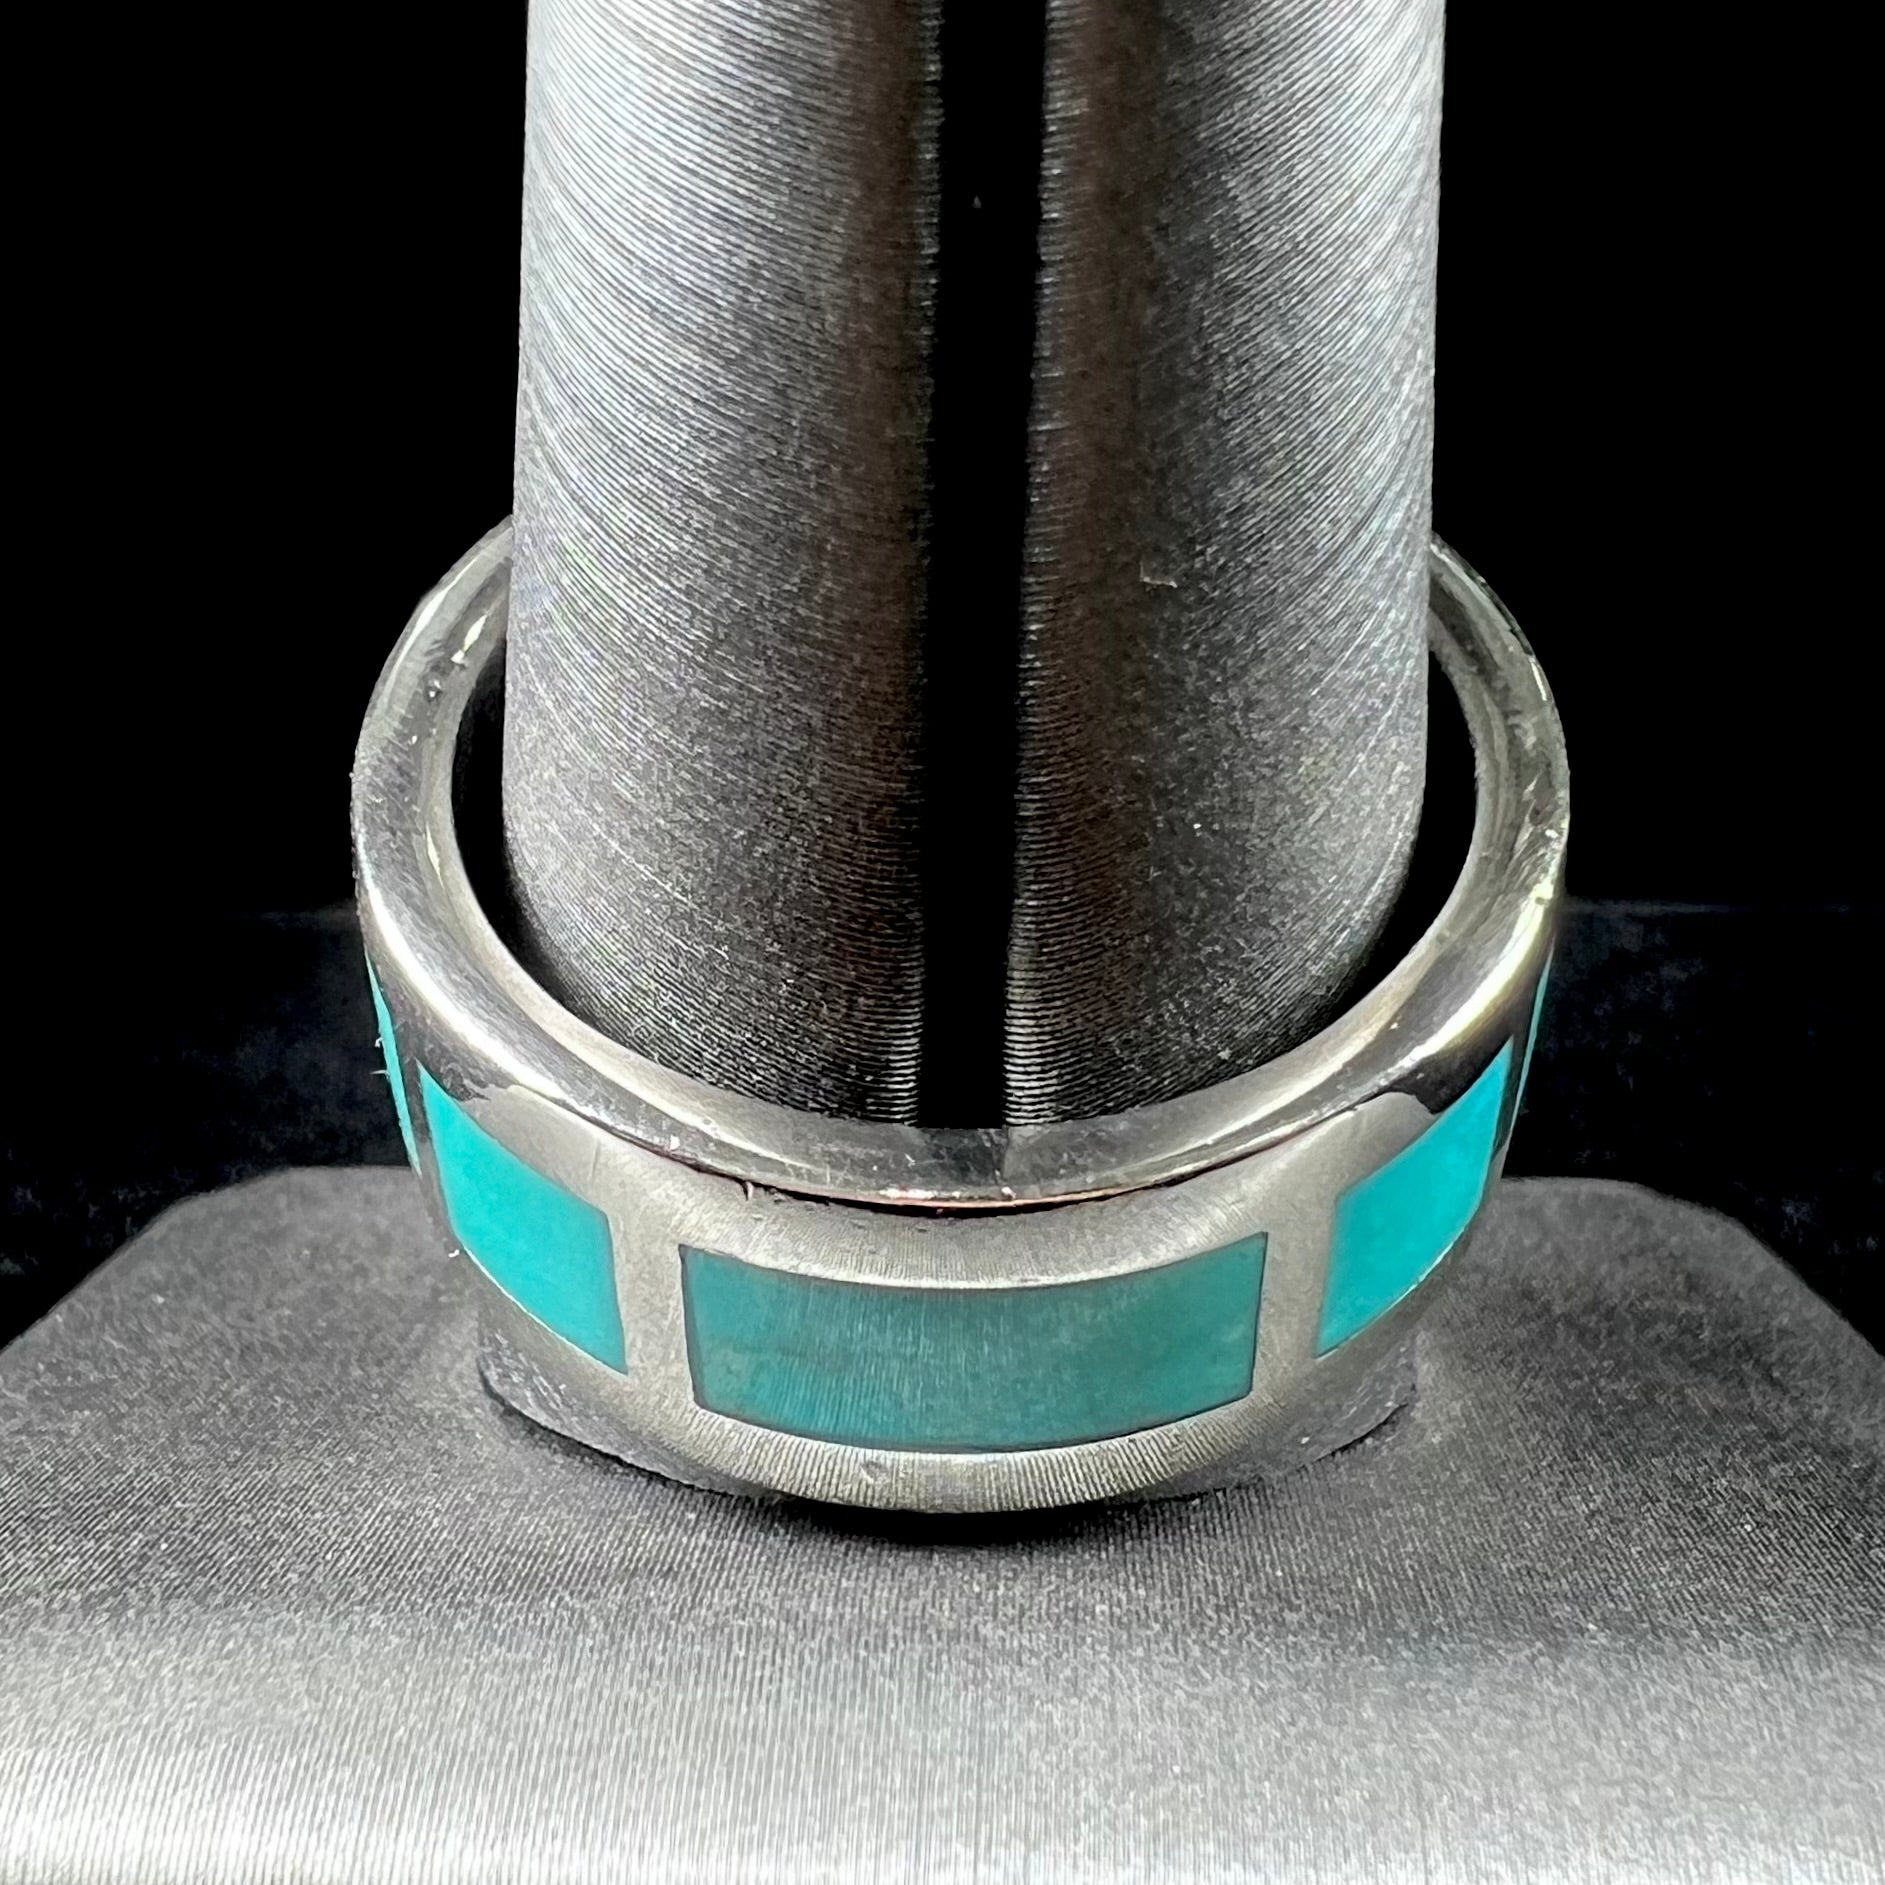 A men's sterling silver wedding band inlaid with natural Sleeping Beauty Turquoise stones that go all the way around.